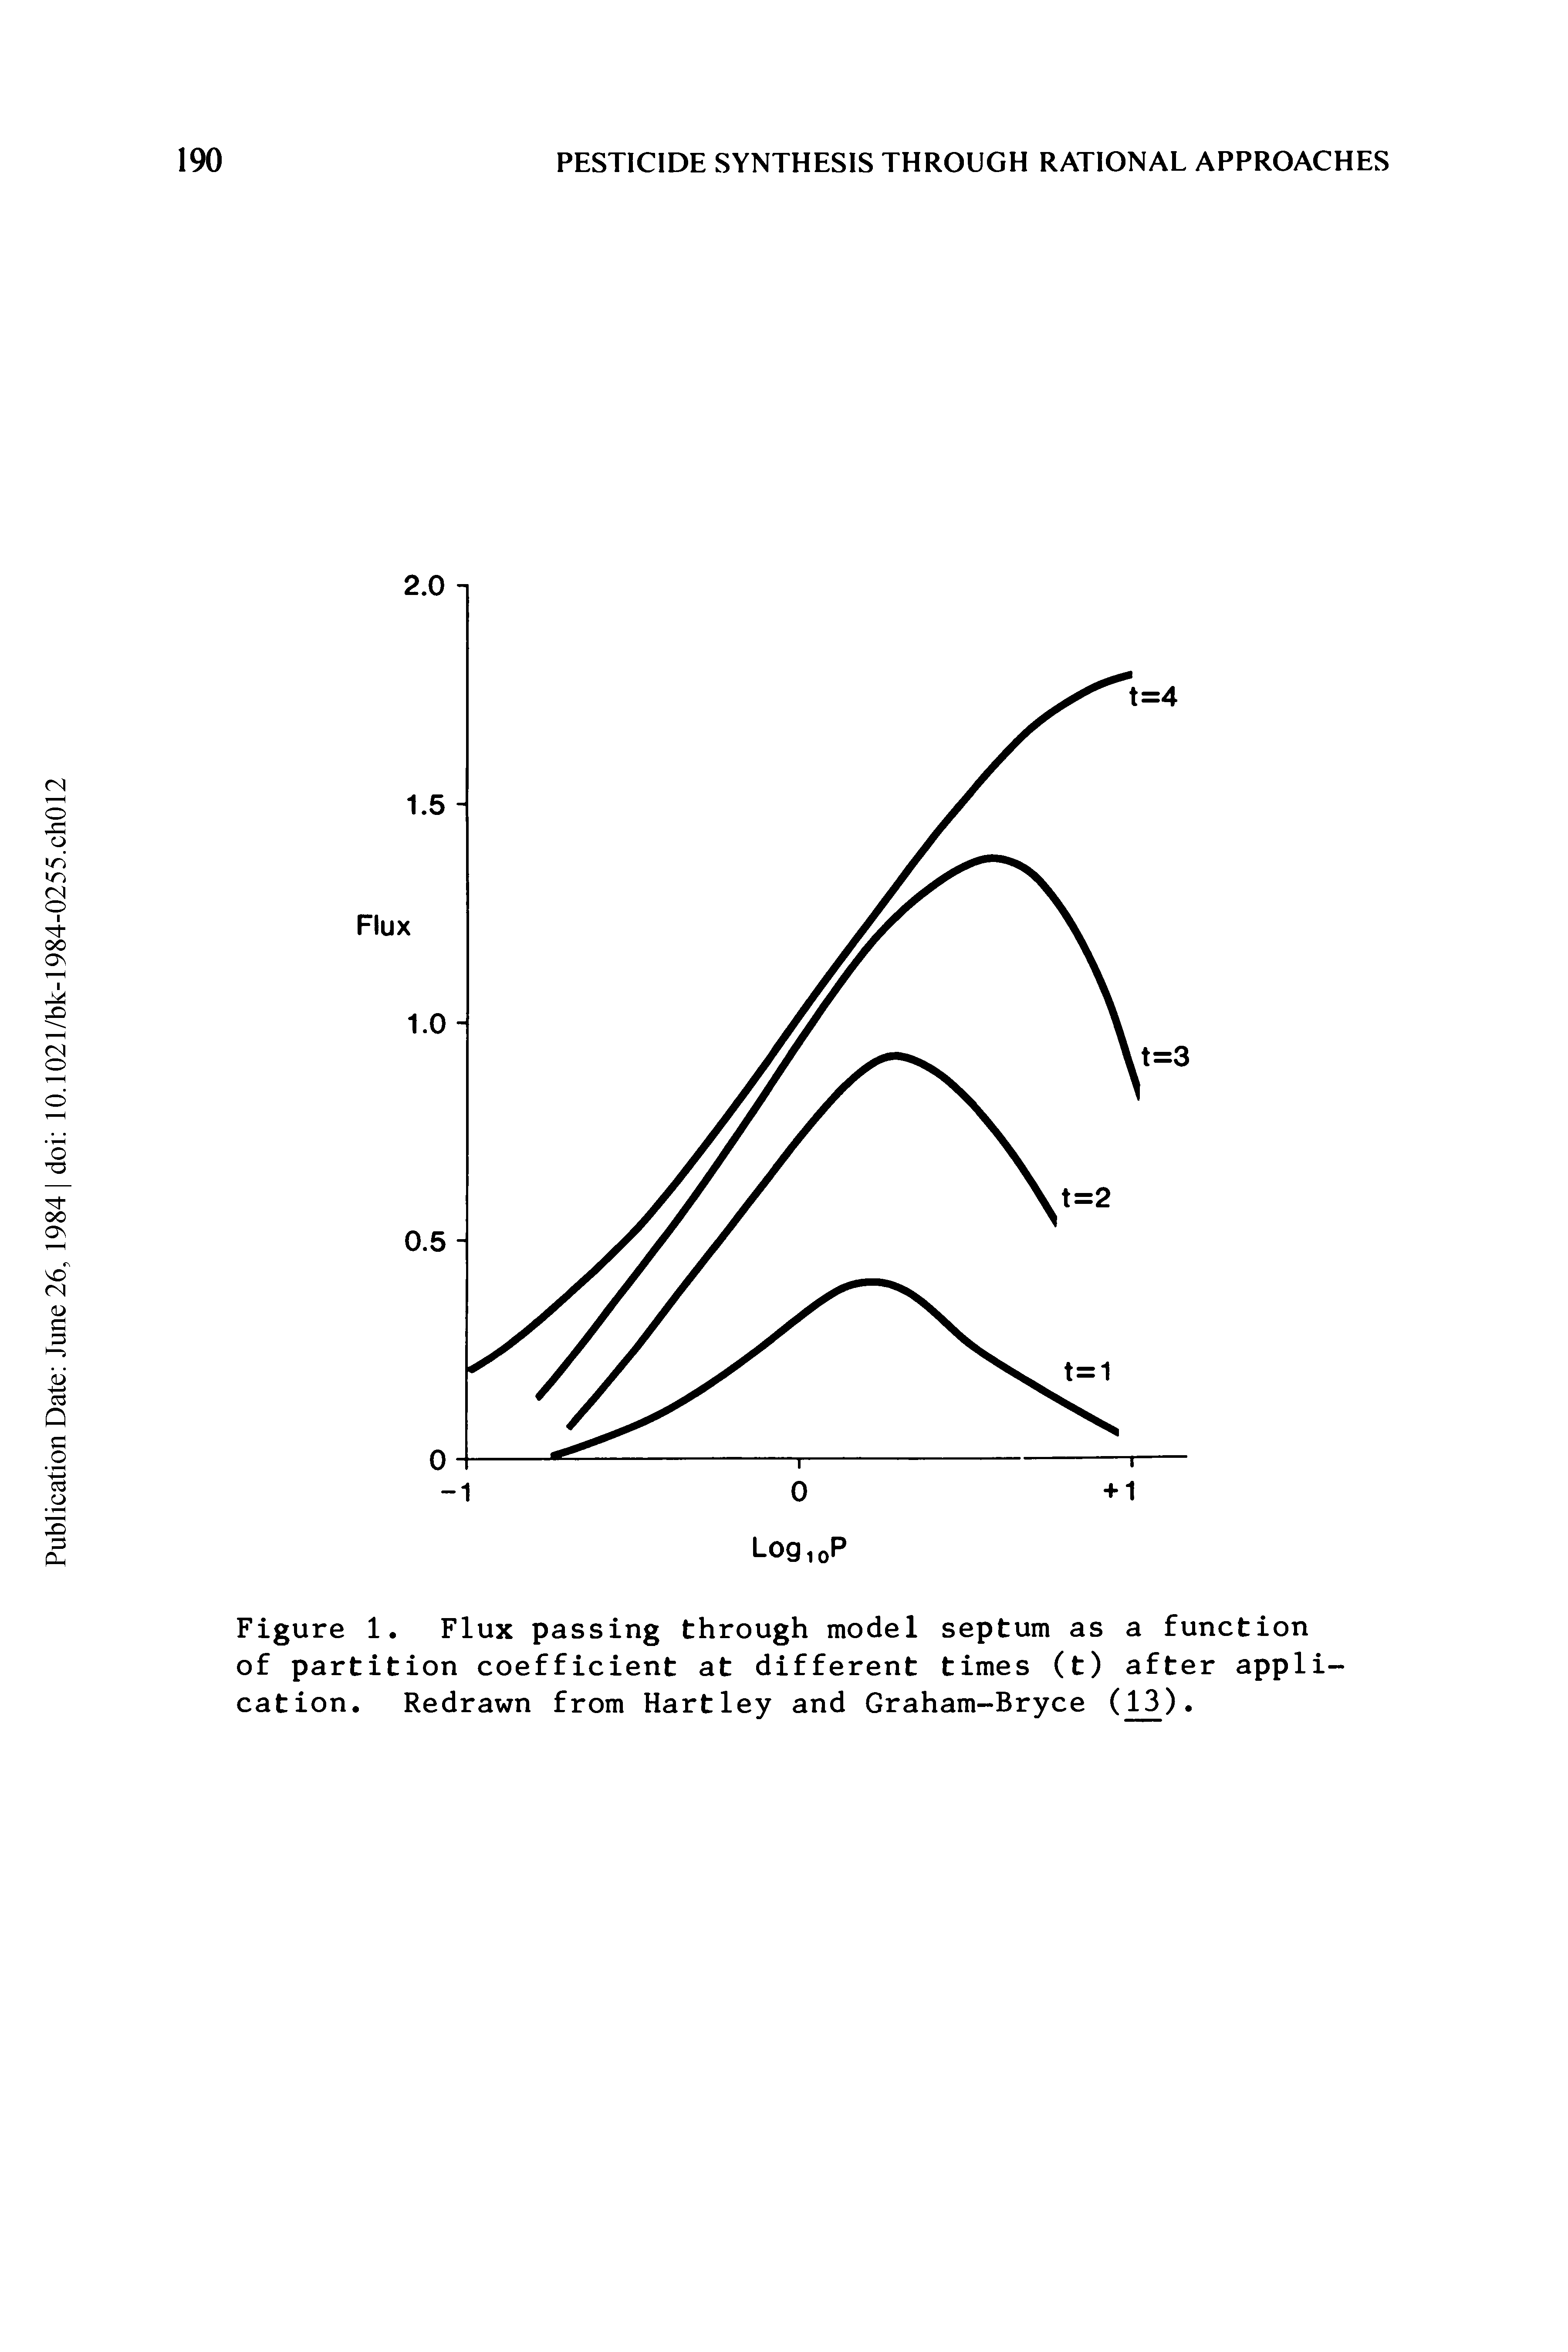 Figure 1. Flux passing through model septum as a function of partition coefficient at different times (t) after application. Redrawn from Hartley and Graham-Bryce (13).